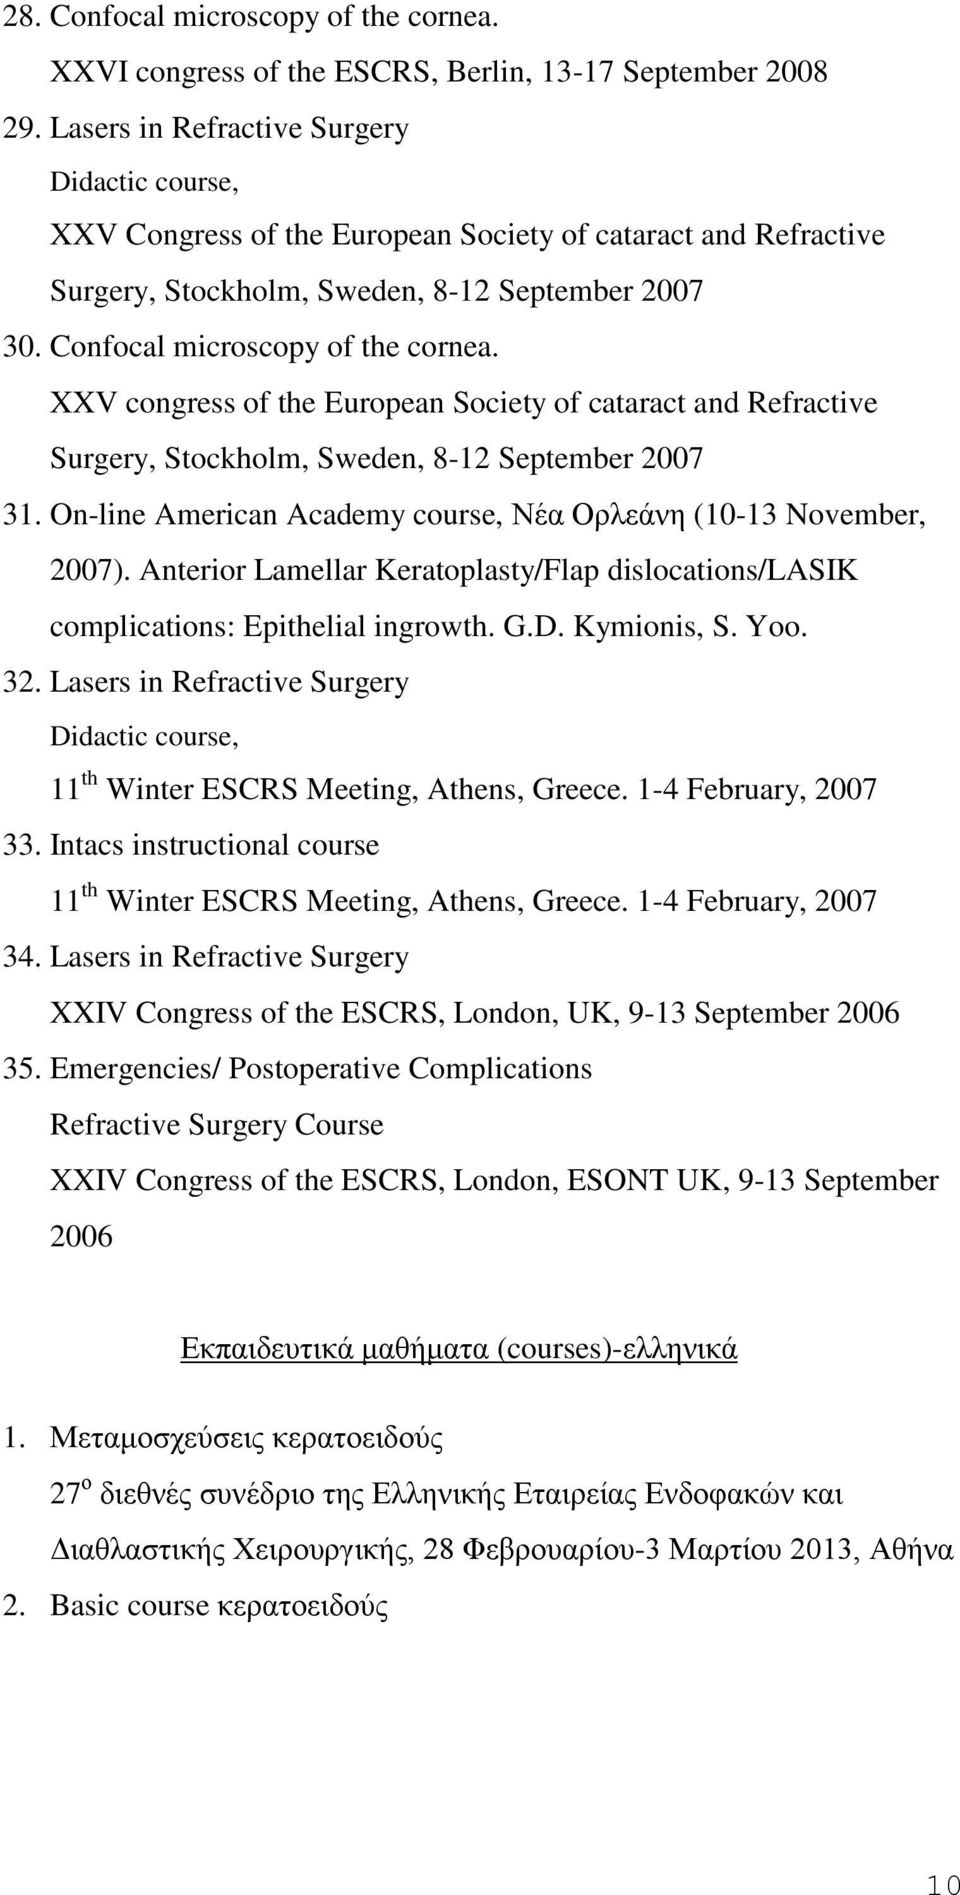 XXV congress of the European Society of cataract and Refractive Surgery, Stockholm, Sweden, 8-12 September 2007 31. On-line American Academy course, Νέα Ορλεάνη (10-13 November, 2007).